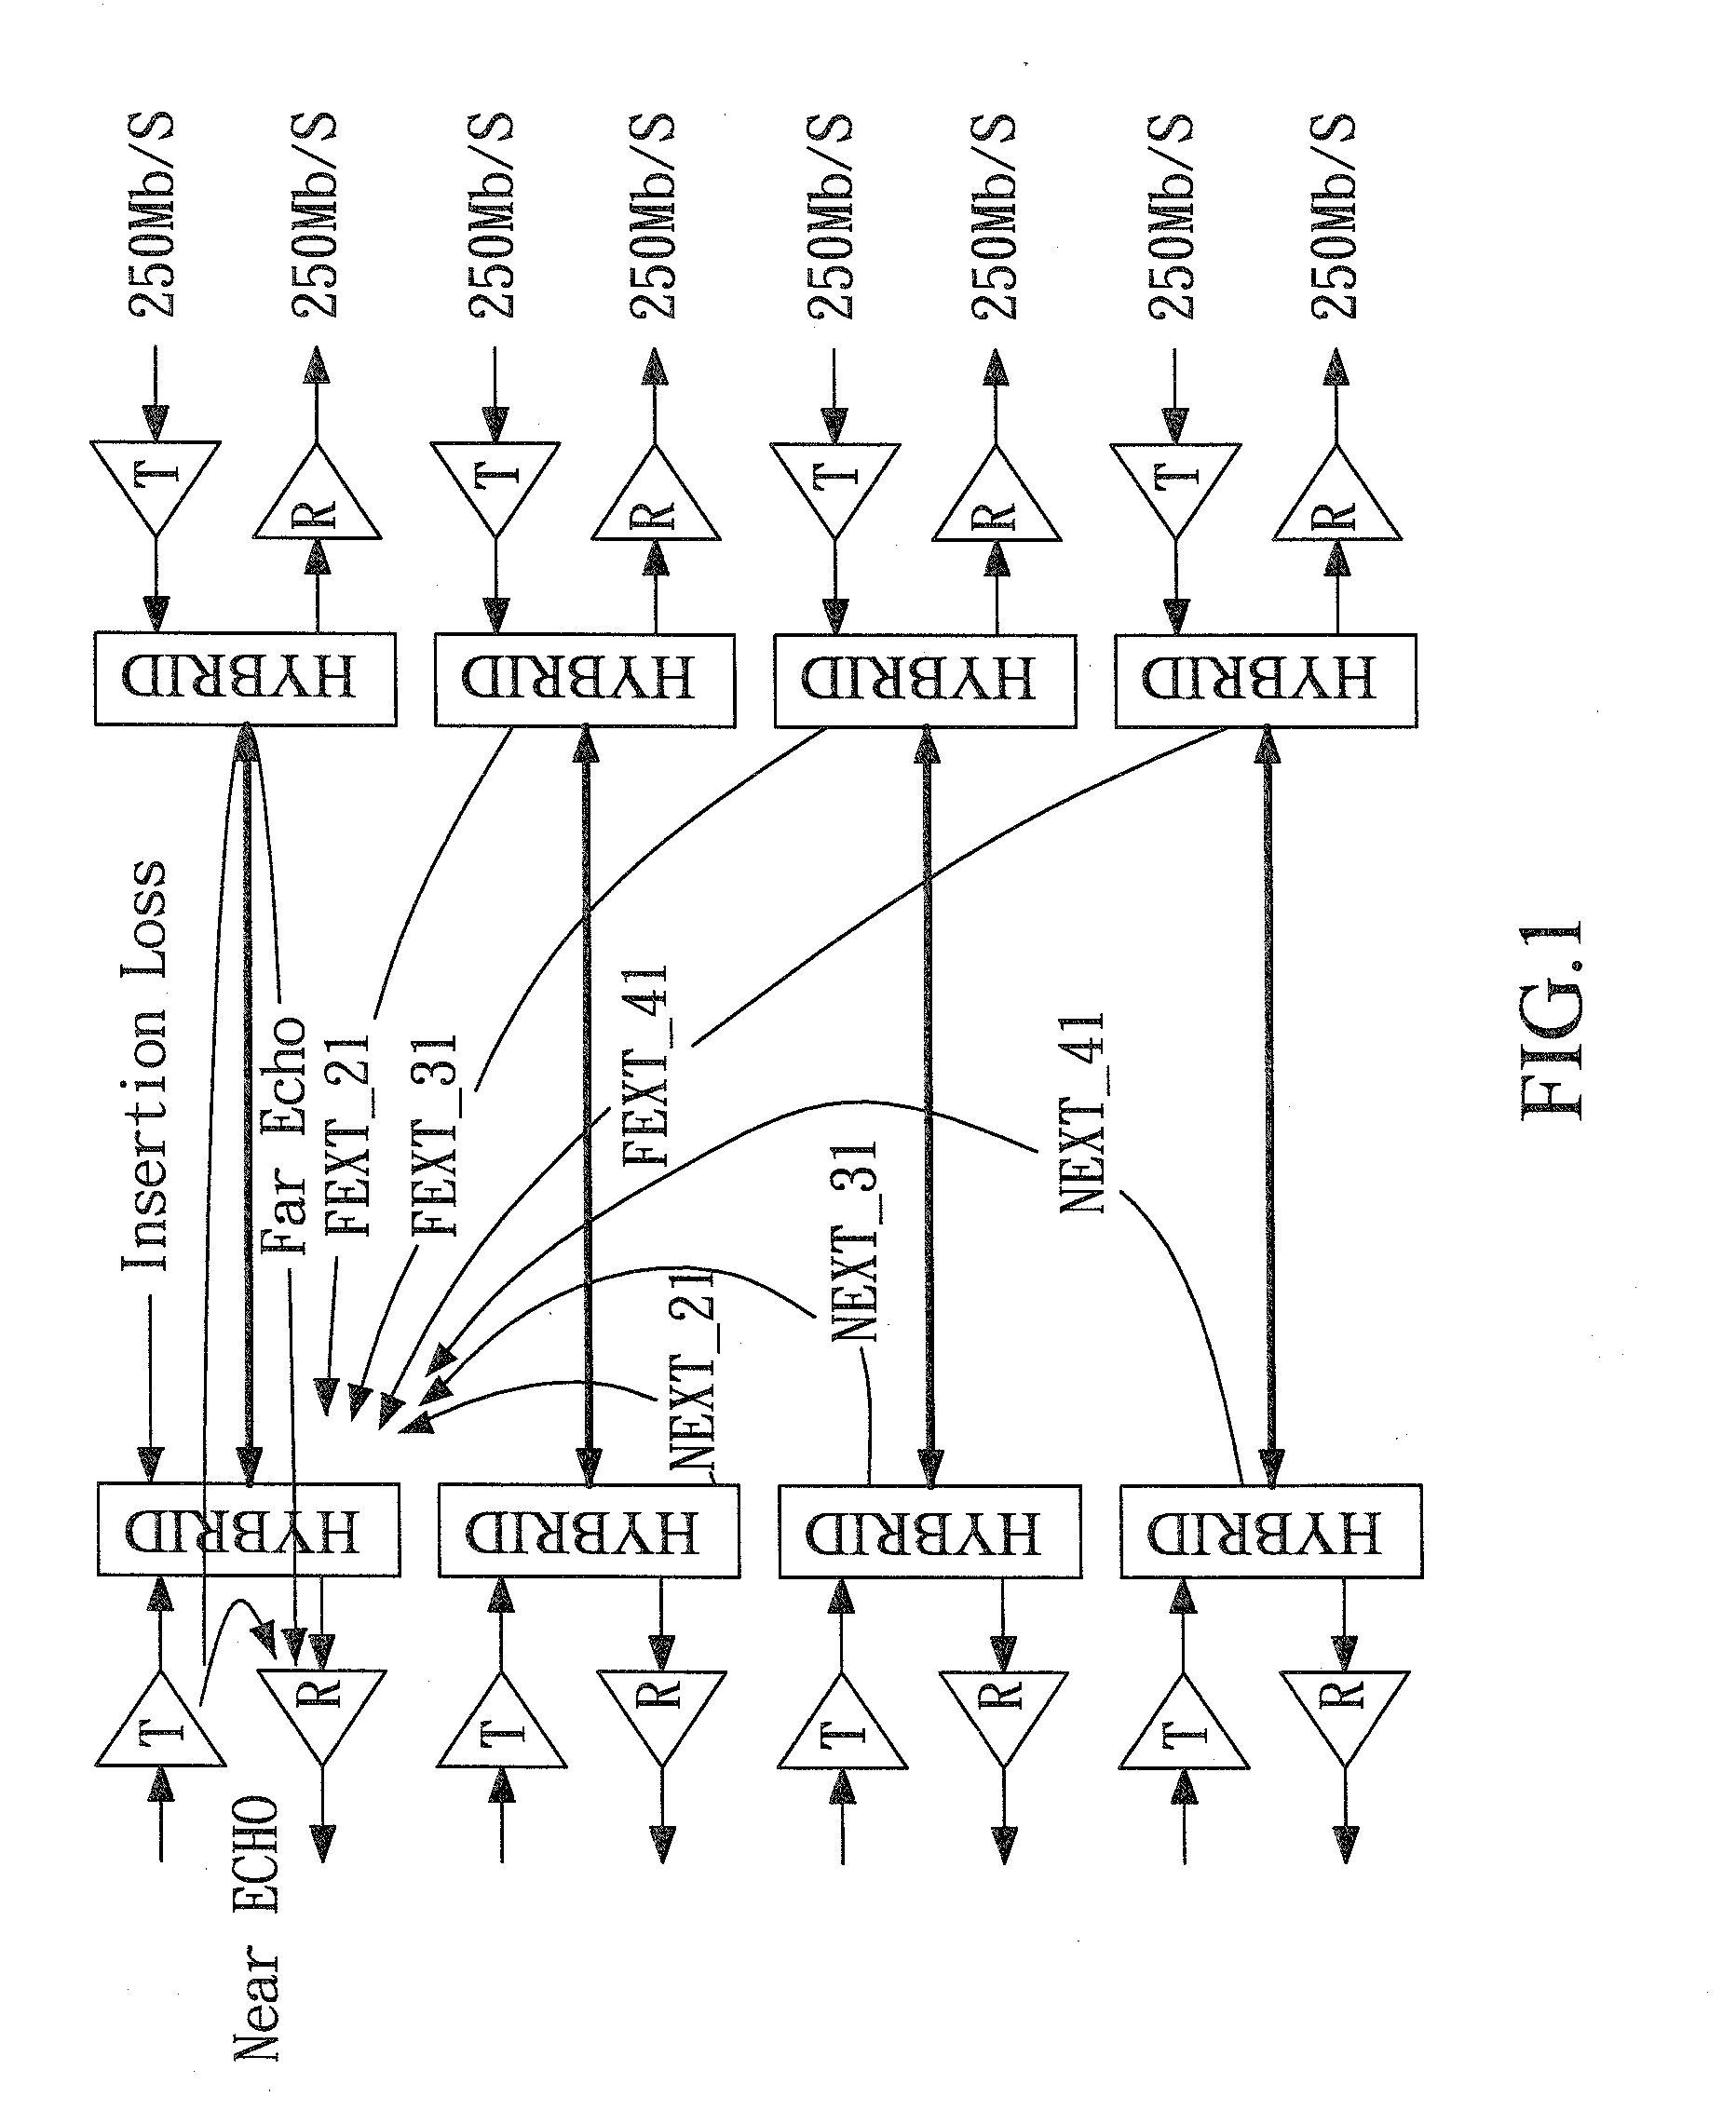 Adaptive ethernet transceiver with joint decision feedback equalizer and trellis decoder